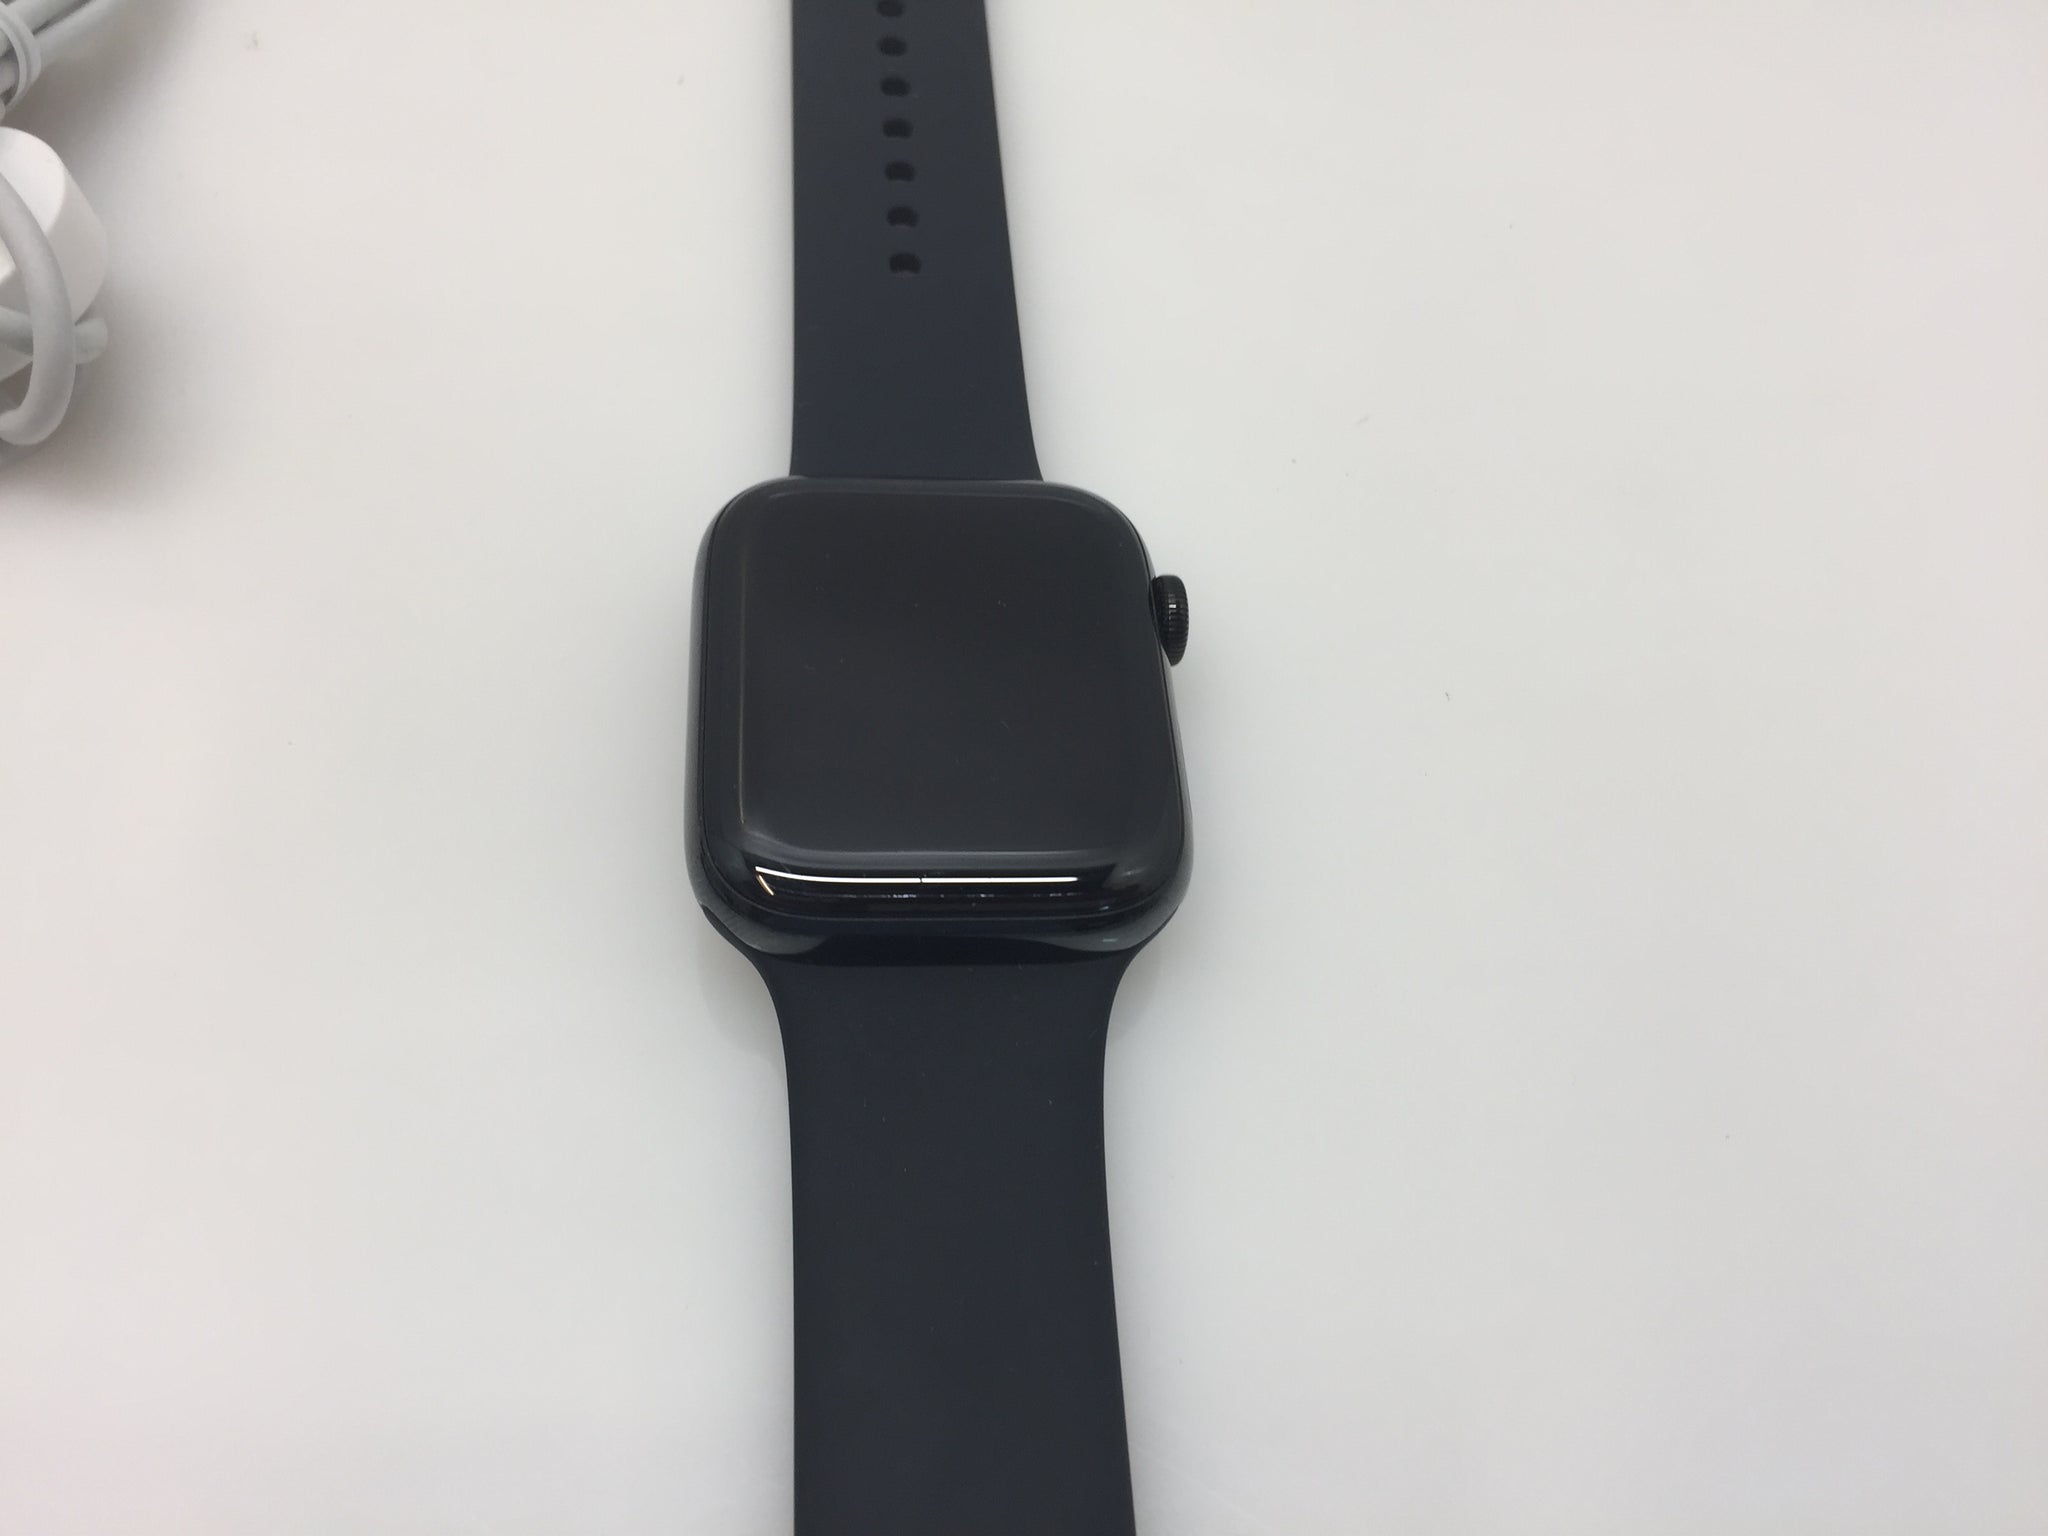 Apple Watch Series 4 MTV52LL/A 44mm Stainless Steel Case Black